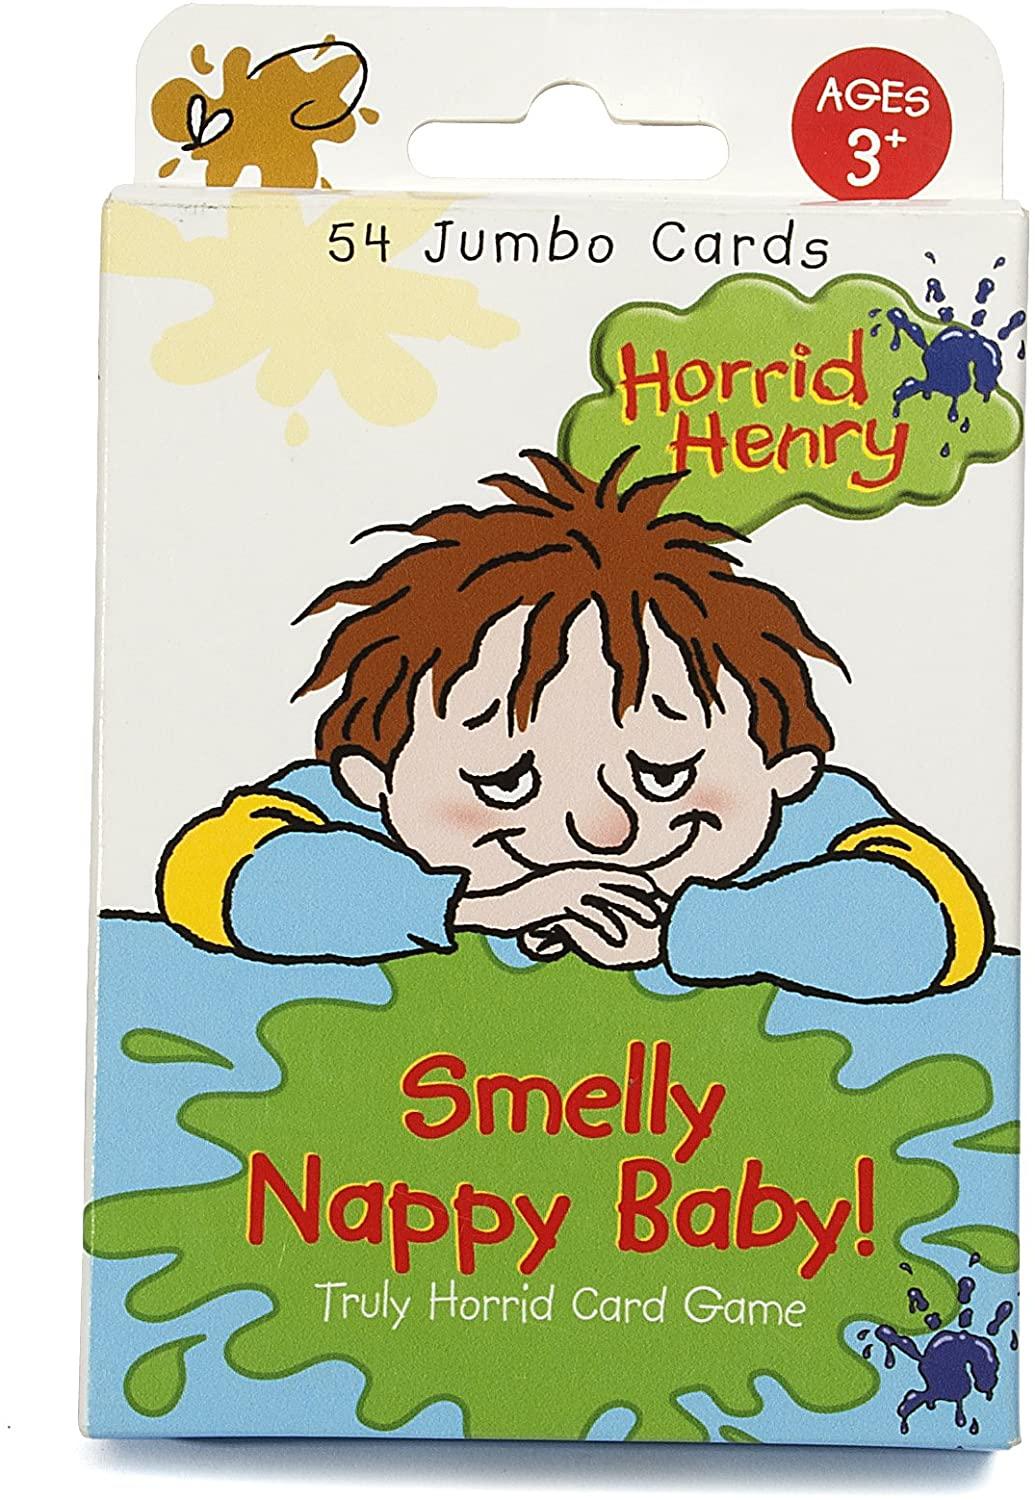 Rectangular box  containging Horrid Henry card game with cartoon illustration of brown haired boy with his hands joined on front of him and his head down and peeking over. Large green splodge in lower section with wording that reads: "Smelly Nappy Baby! Truly Horris Card Game"